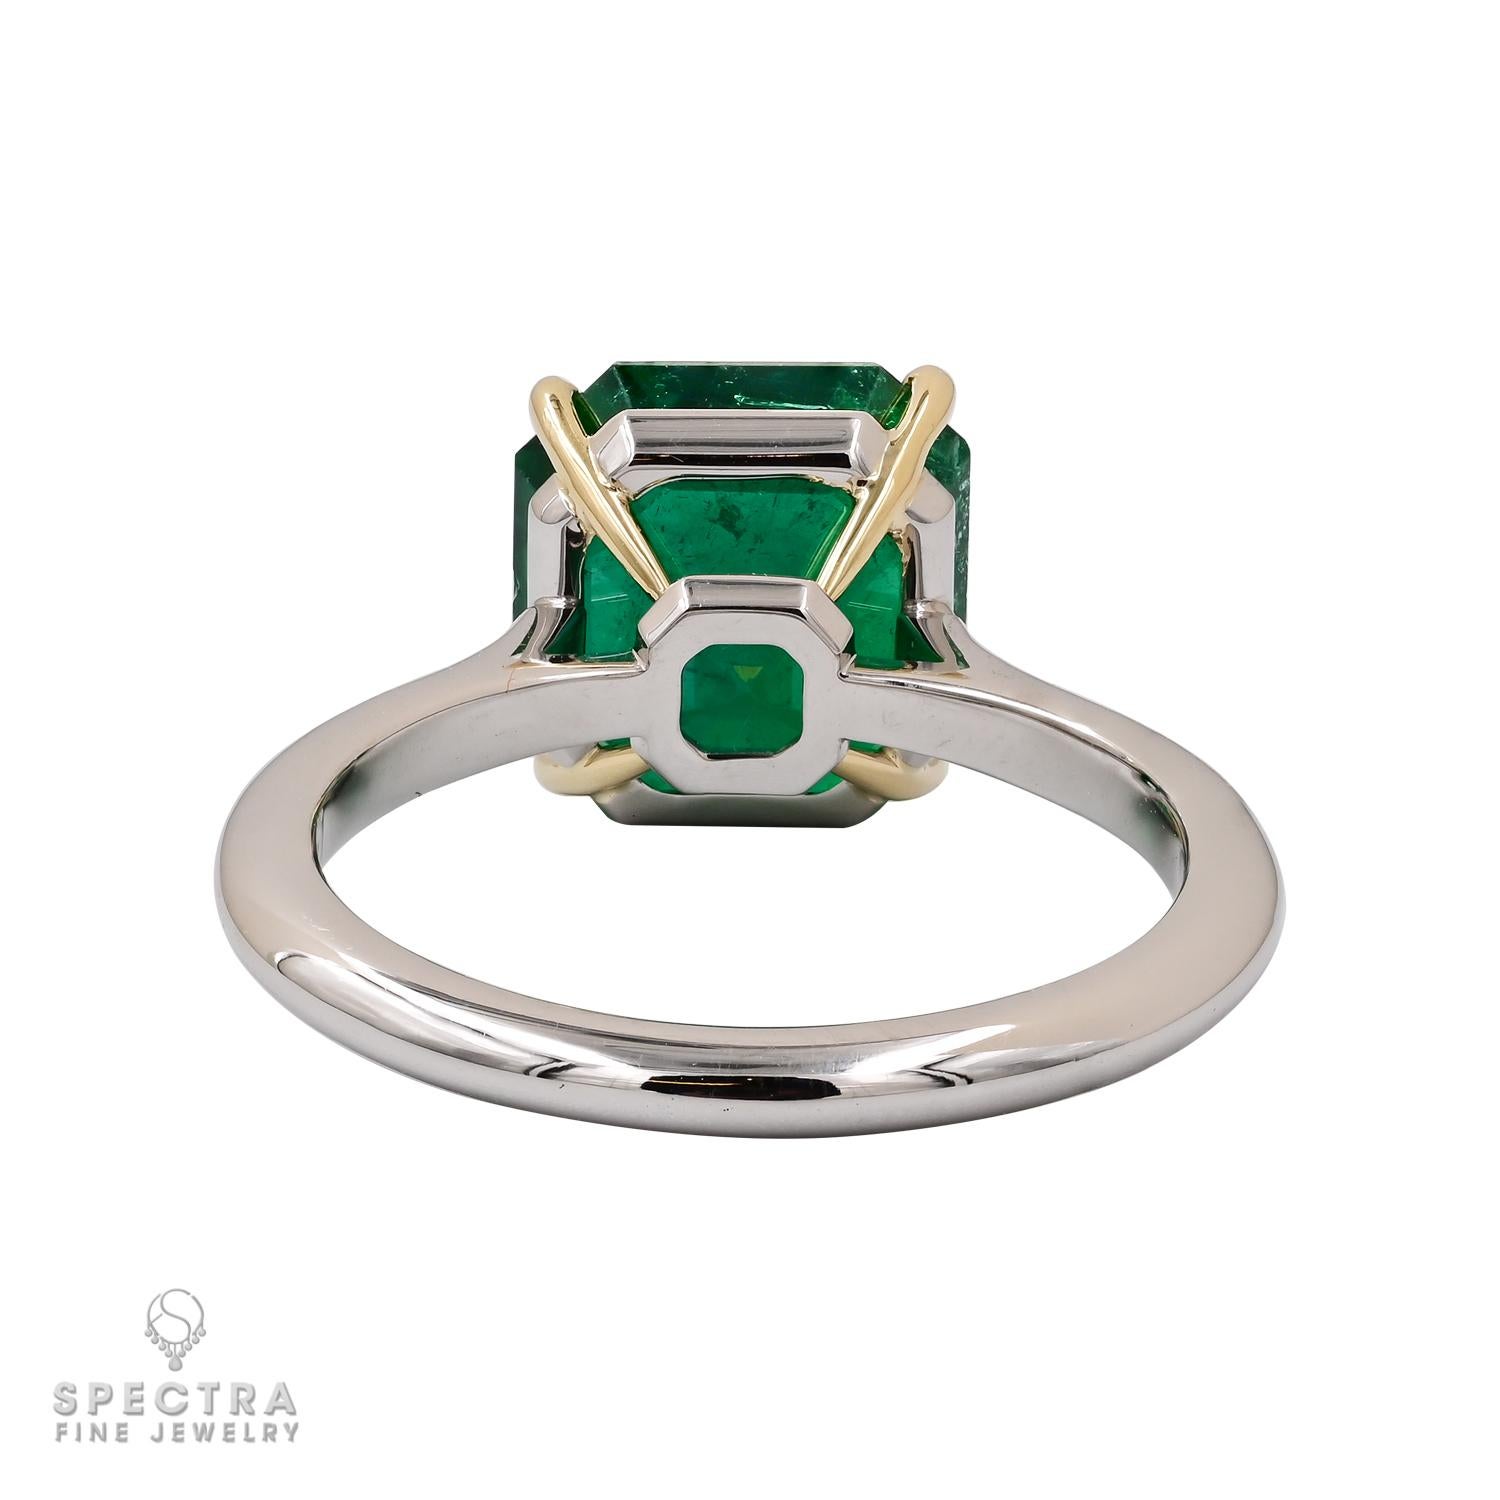 Emerald Cut Spectra Fine Jewelry GRS Certified Colombian Emerald Platinum Ring For Sale